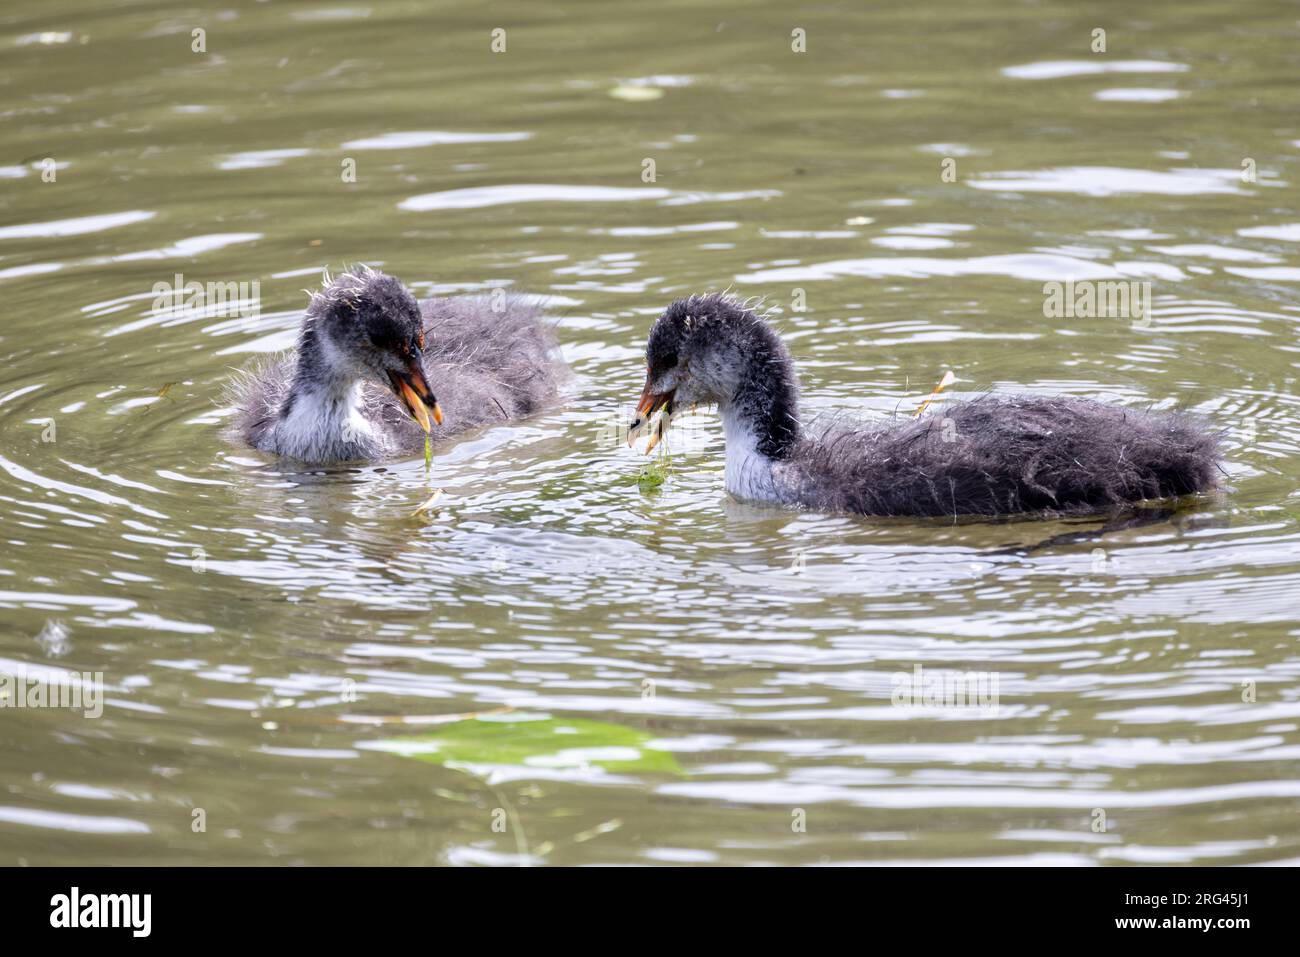 An adorable moment captured in nature as two coot chicks, swimming gracefully in the tranquil waters of a pond, eagerly snap and peck for food. These fluffy and curious creatures showcase their playful behavior as they feed and thrive in their natural habitat. Feeding Frenzy: Two Coot Chicks Snapping for Food in Pond. High quality photo Stock Photo